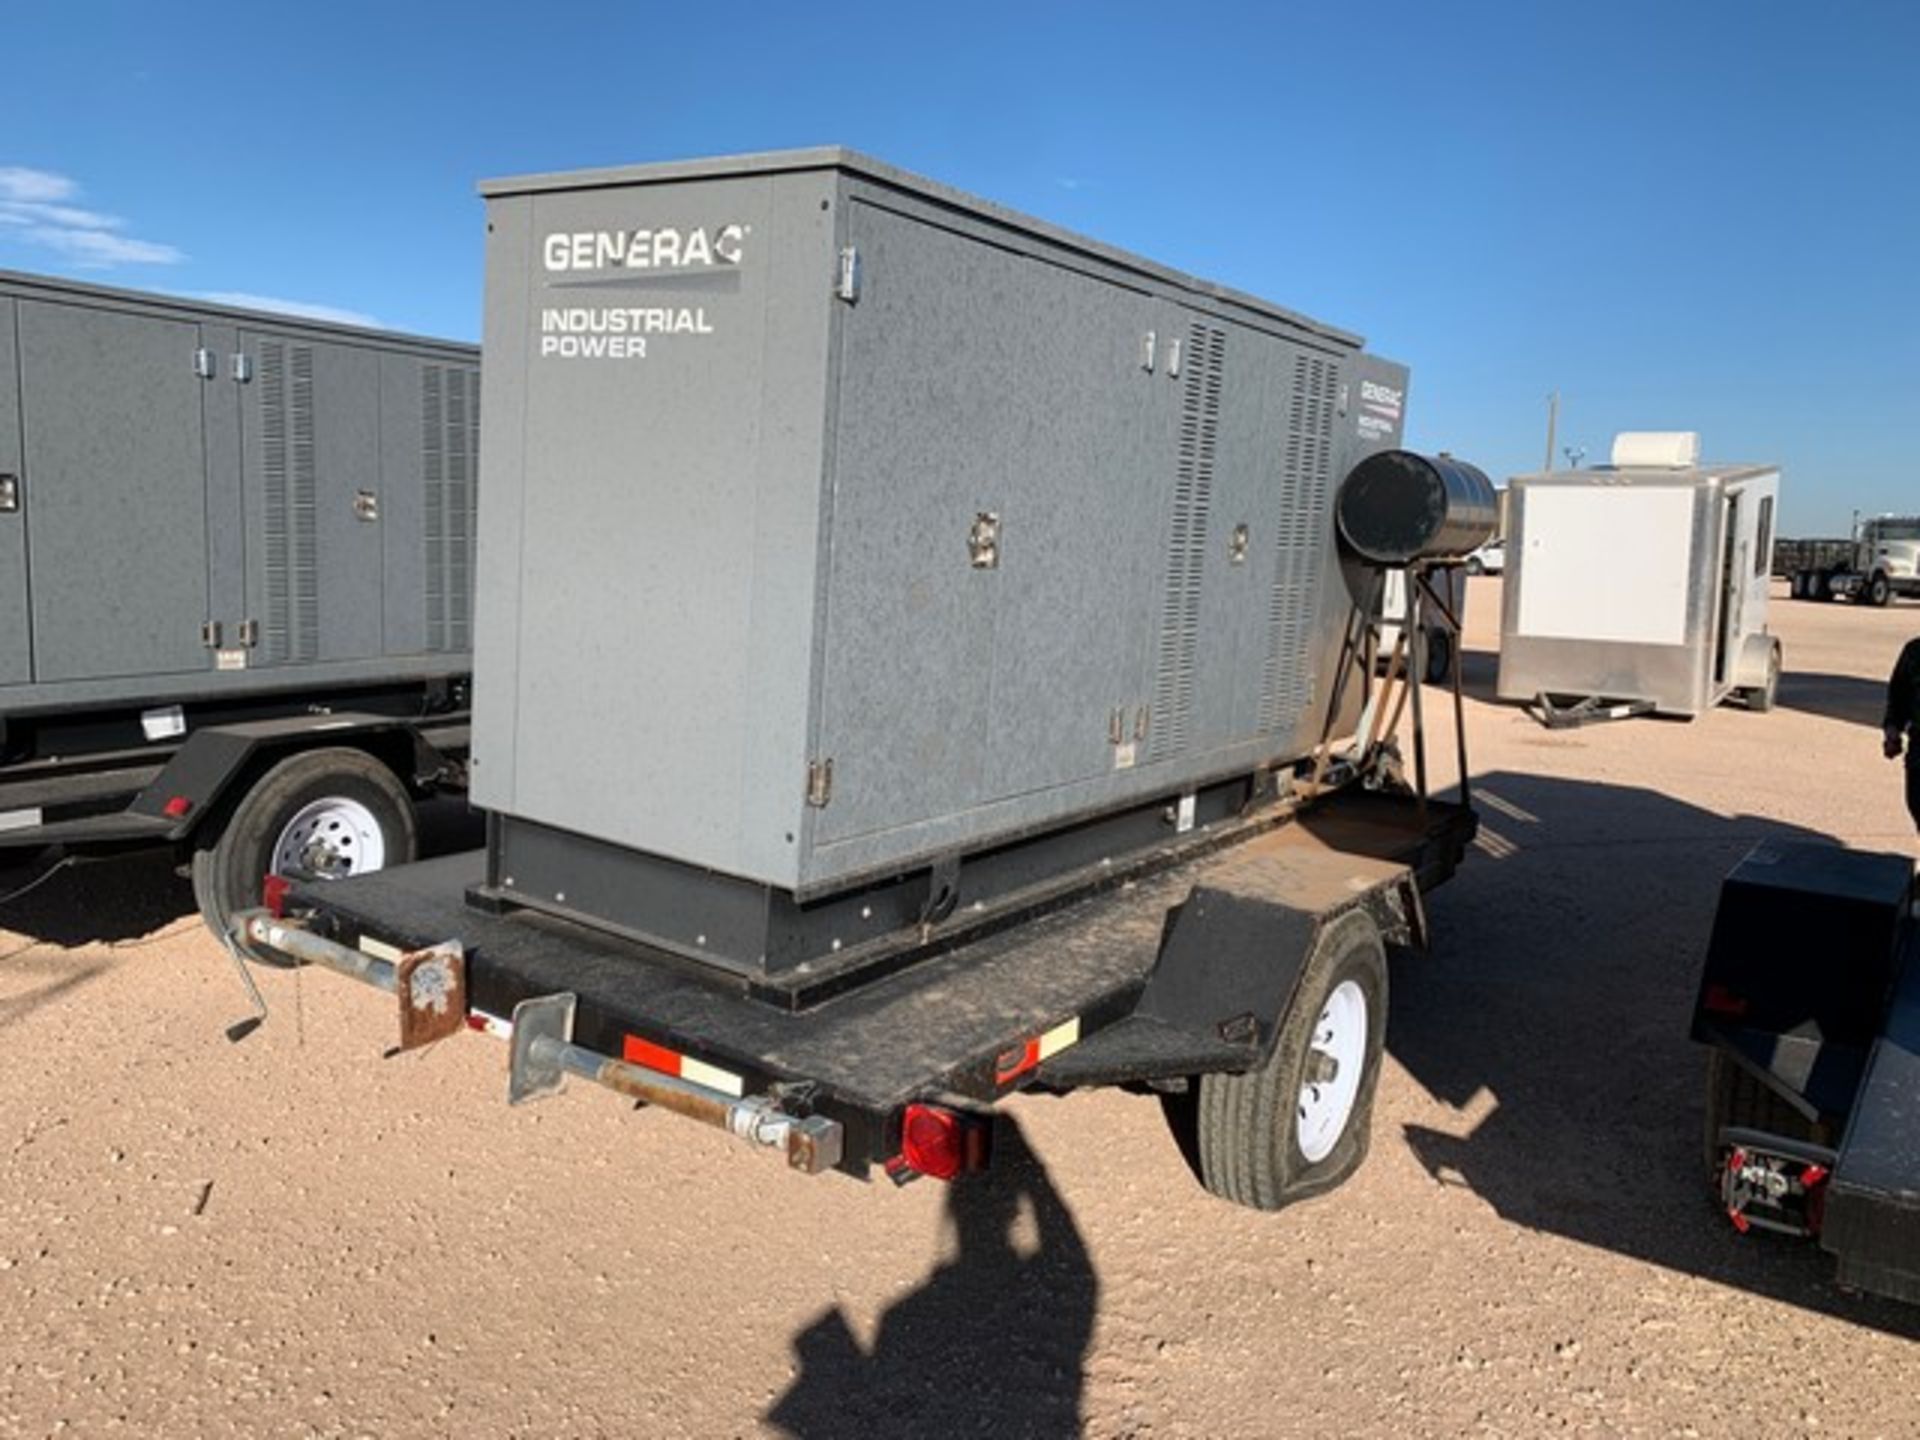 Located in YARD 1 - Midland, TX 2013 GENERAC INDUSTRIAL POWER 130 KW, 277/480V 3 PHASE ELECTRIC - Image 4 of 4